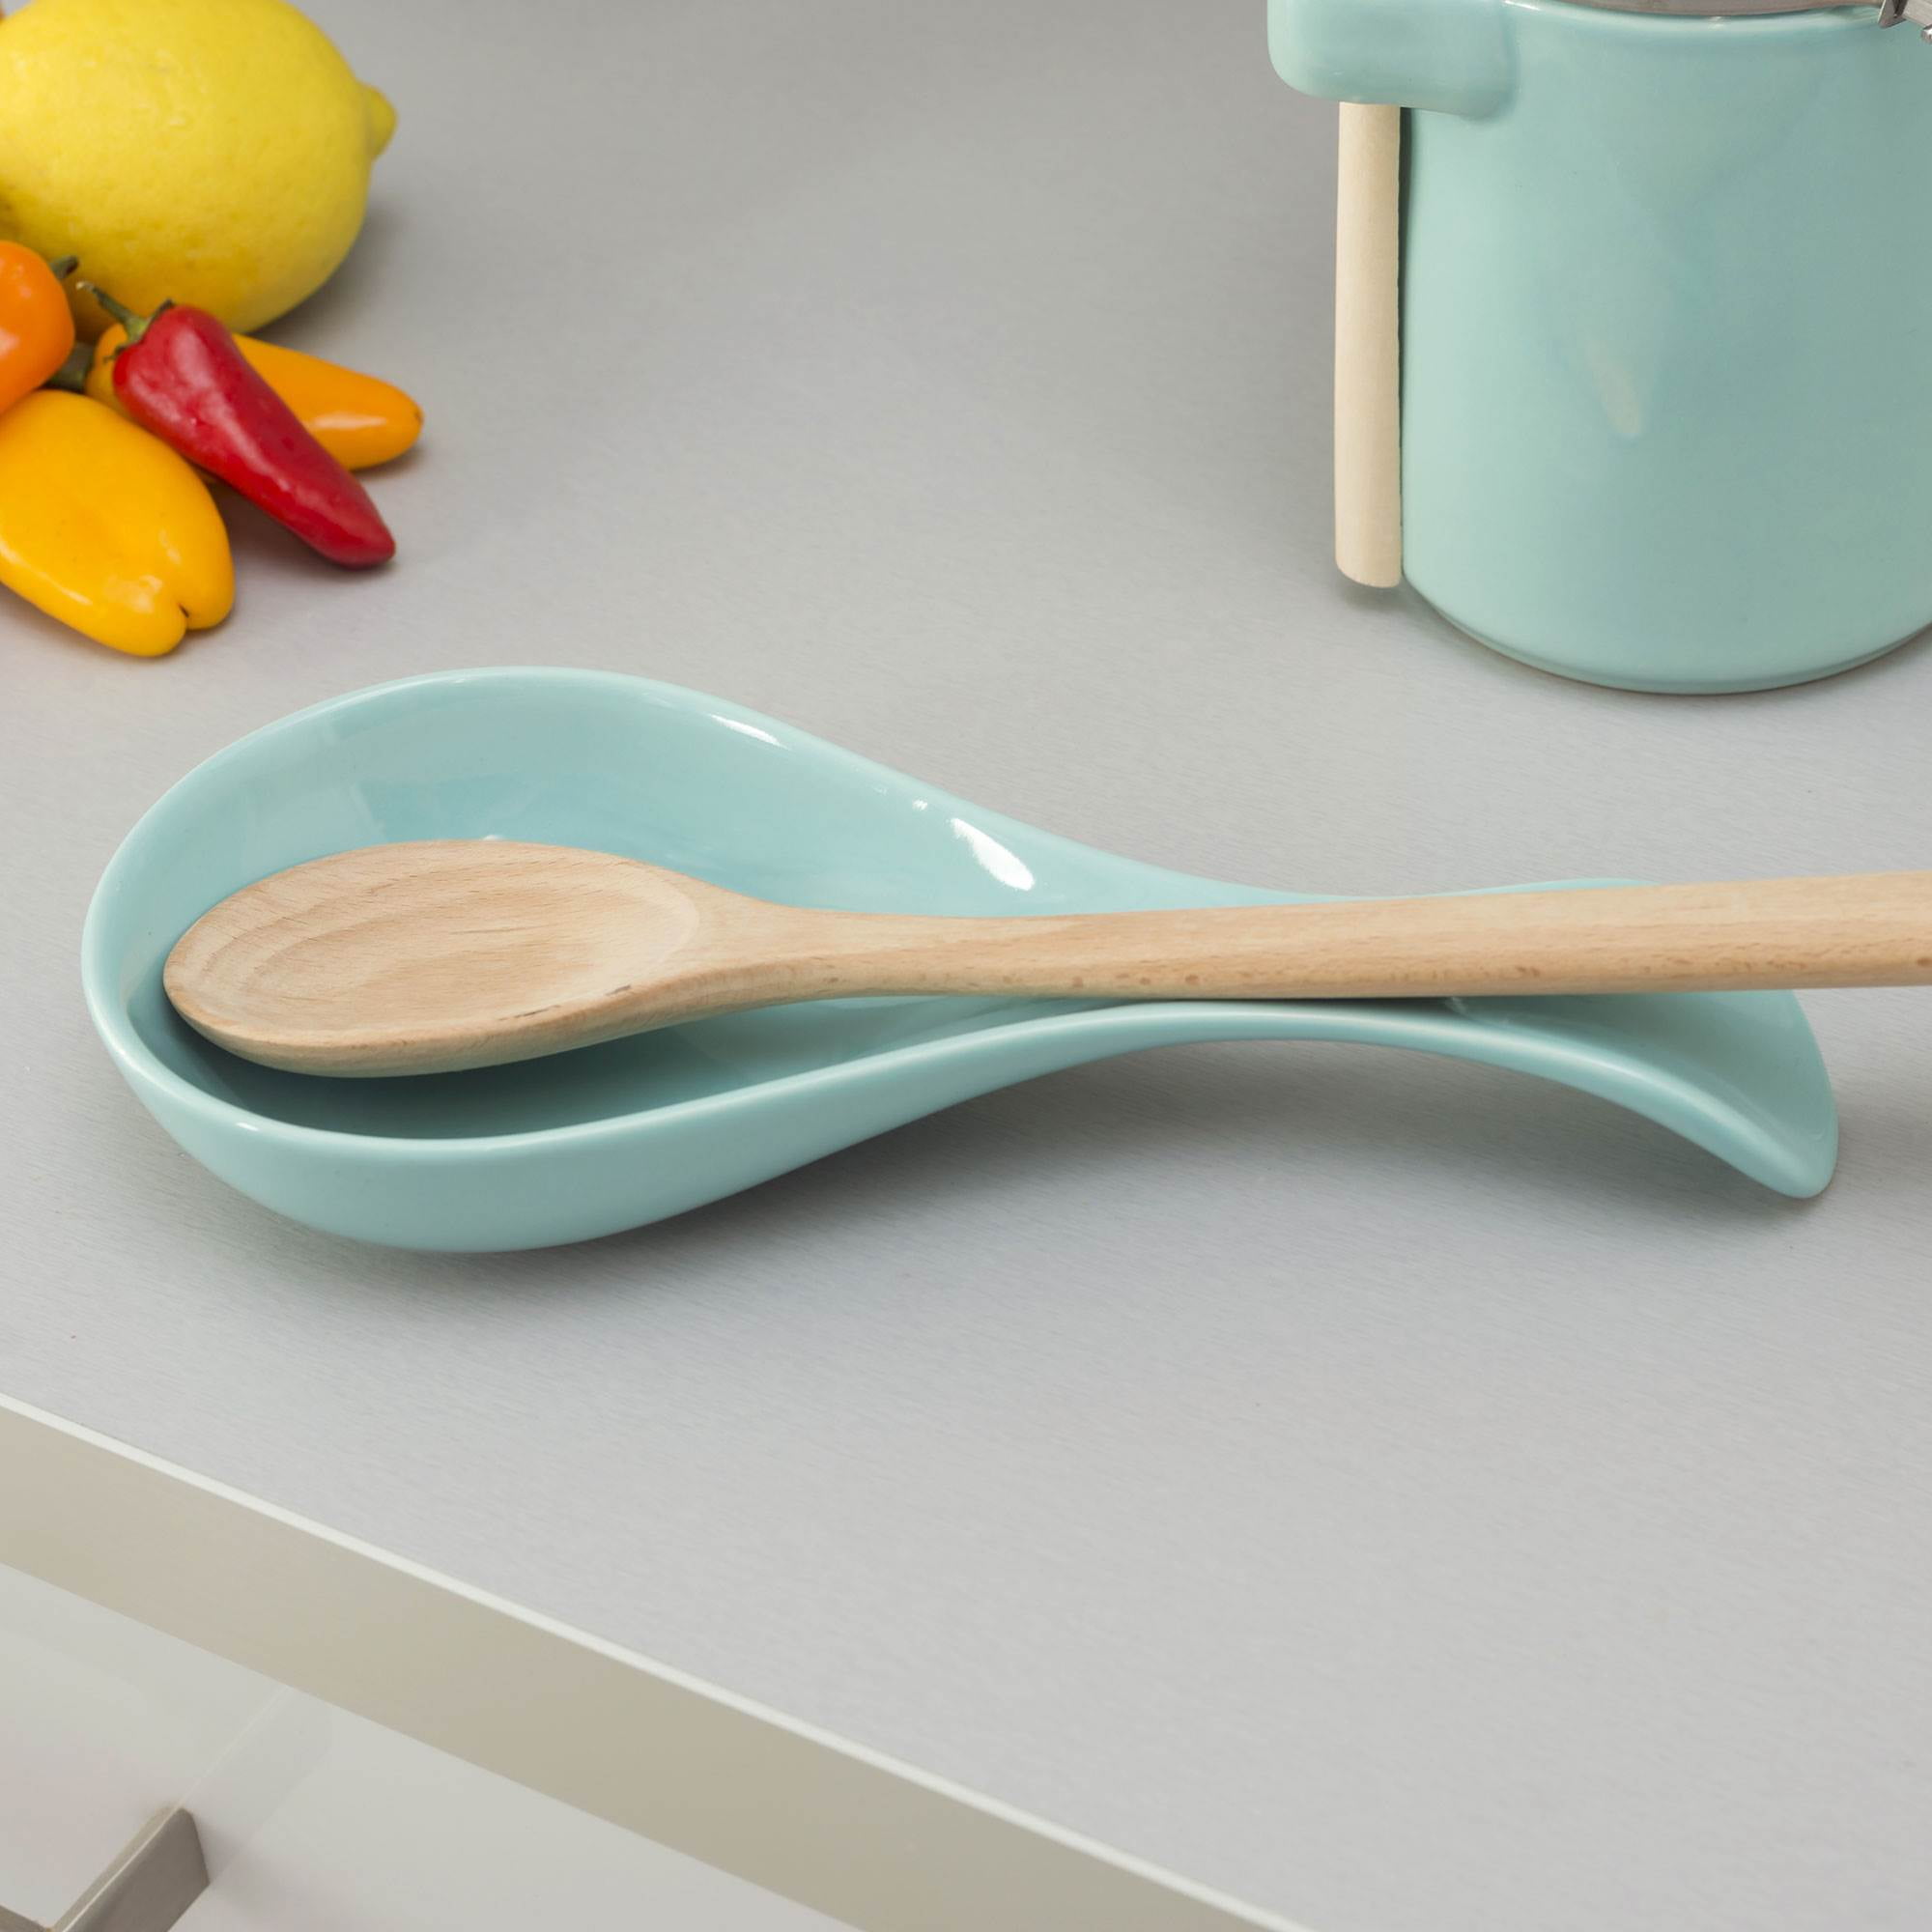 Spatula Tongs Large Ceramic Drip Catcher for Spoons Grill Brushes Mason Jar - Aqua Blue Palais Dinnerware Spoon Rest Collection